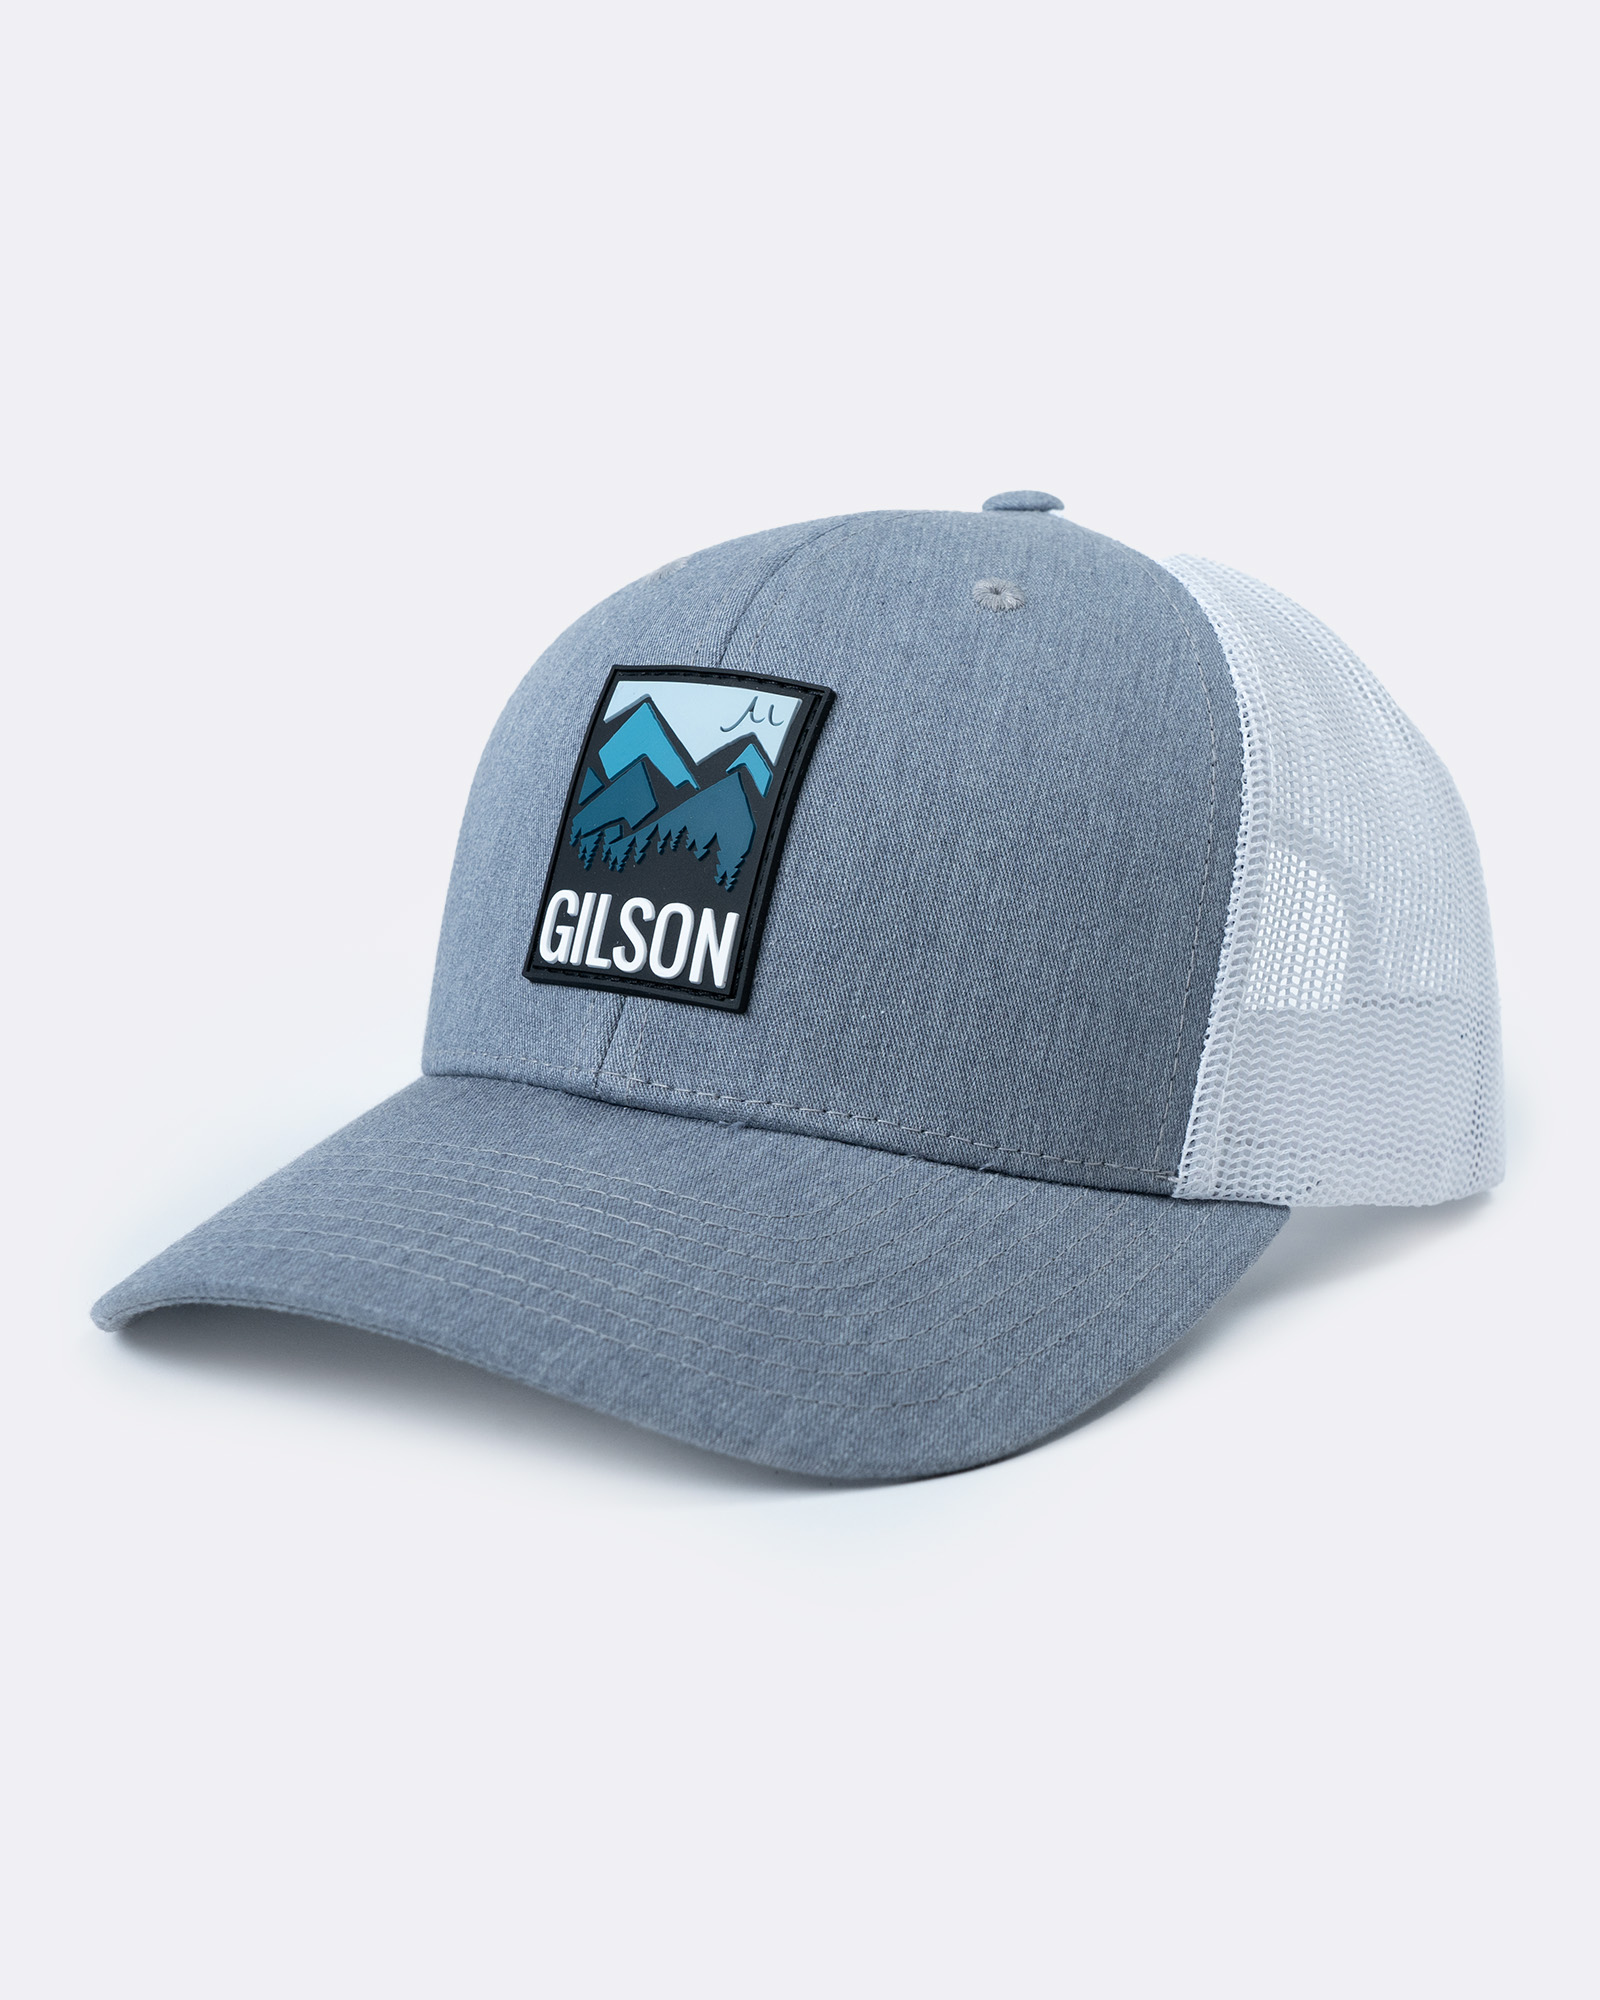 Gilson Trucker 
Rubber Patch Gray graphics